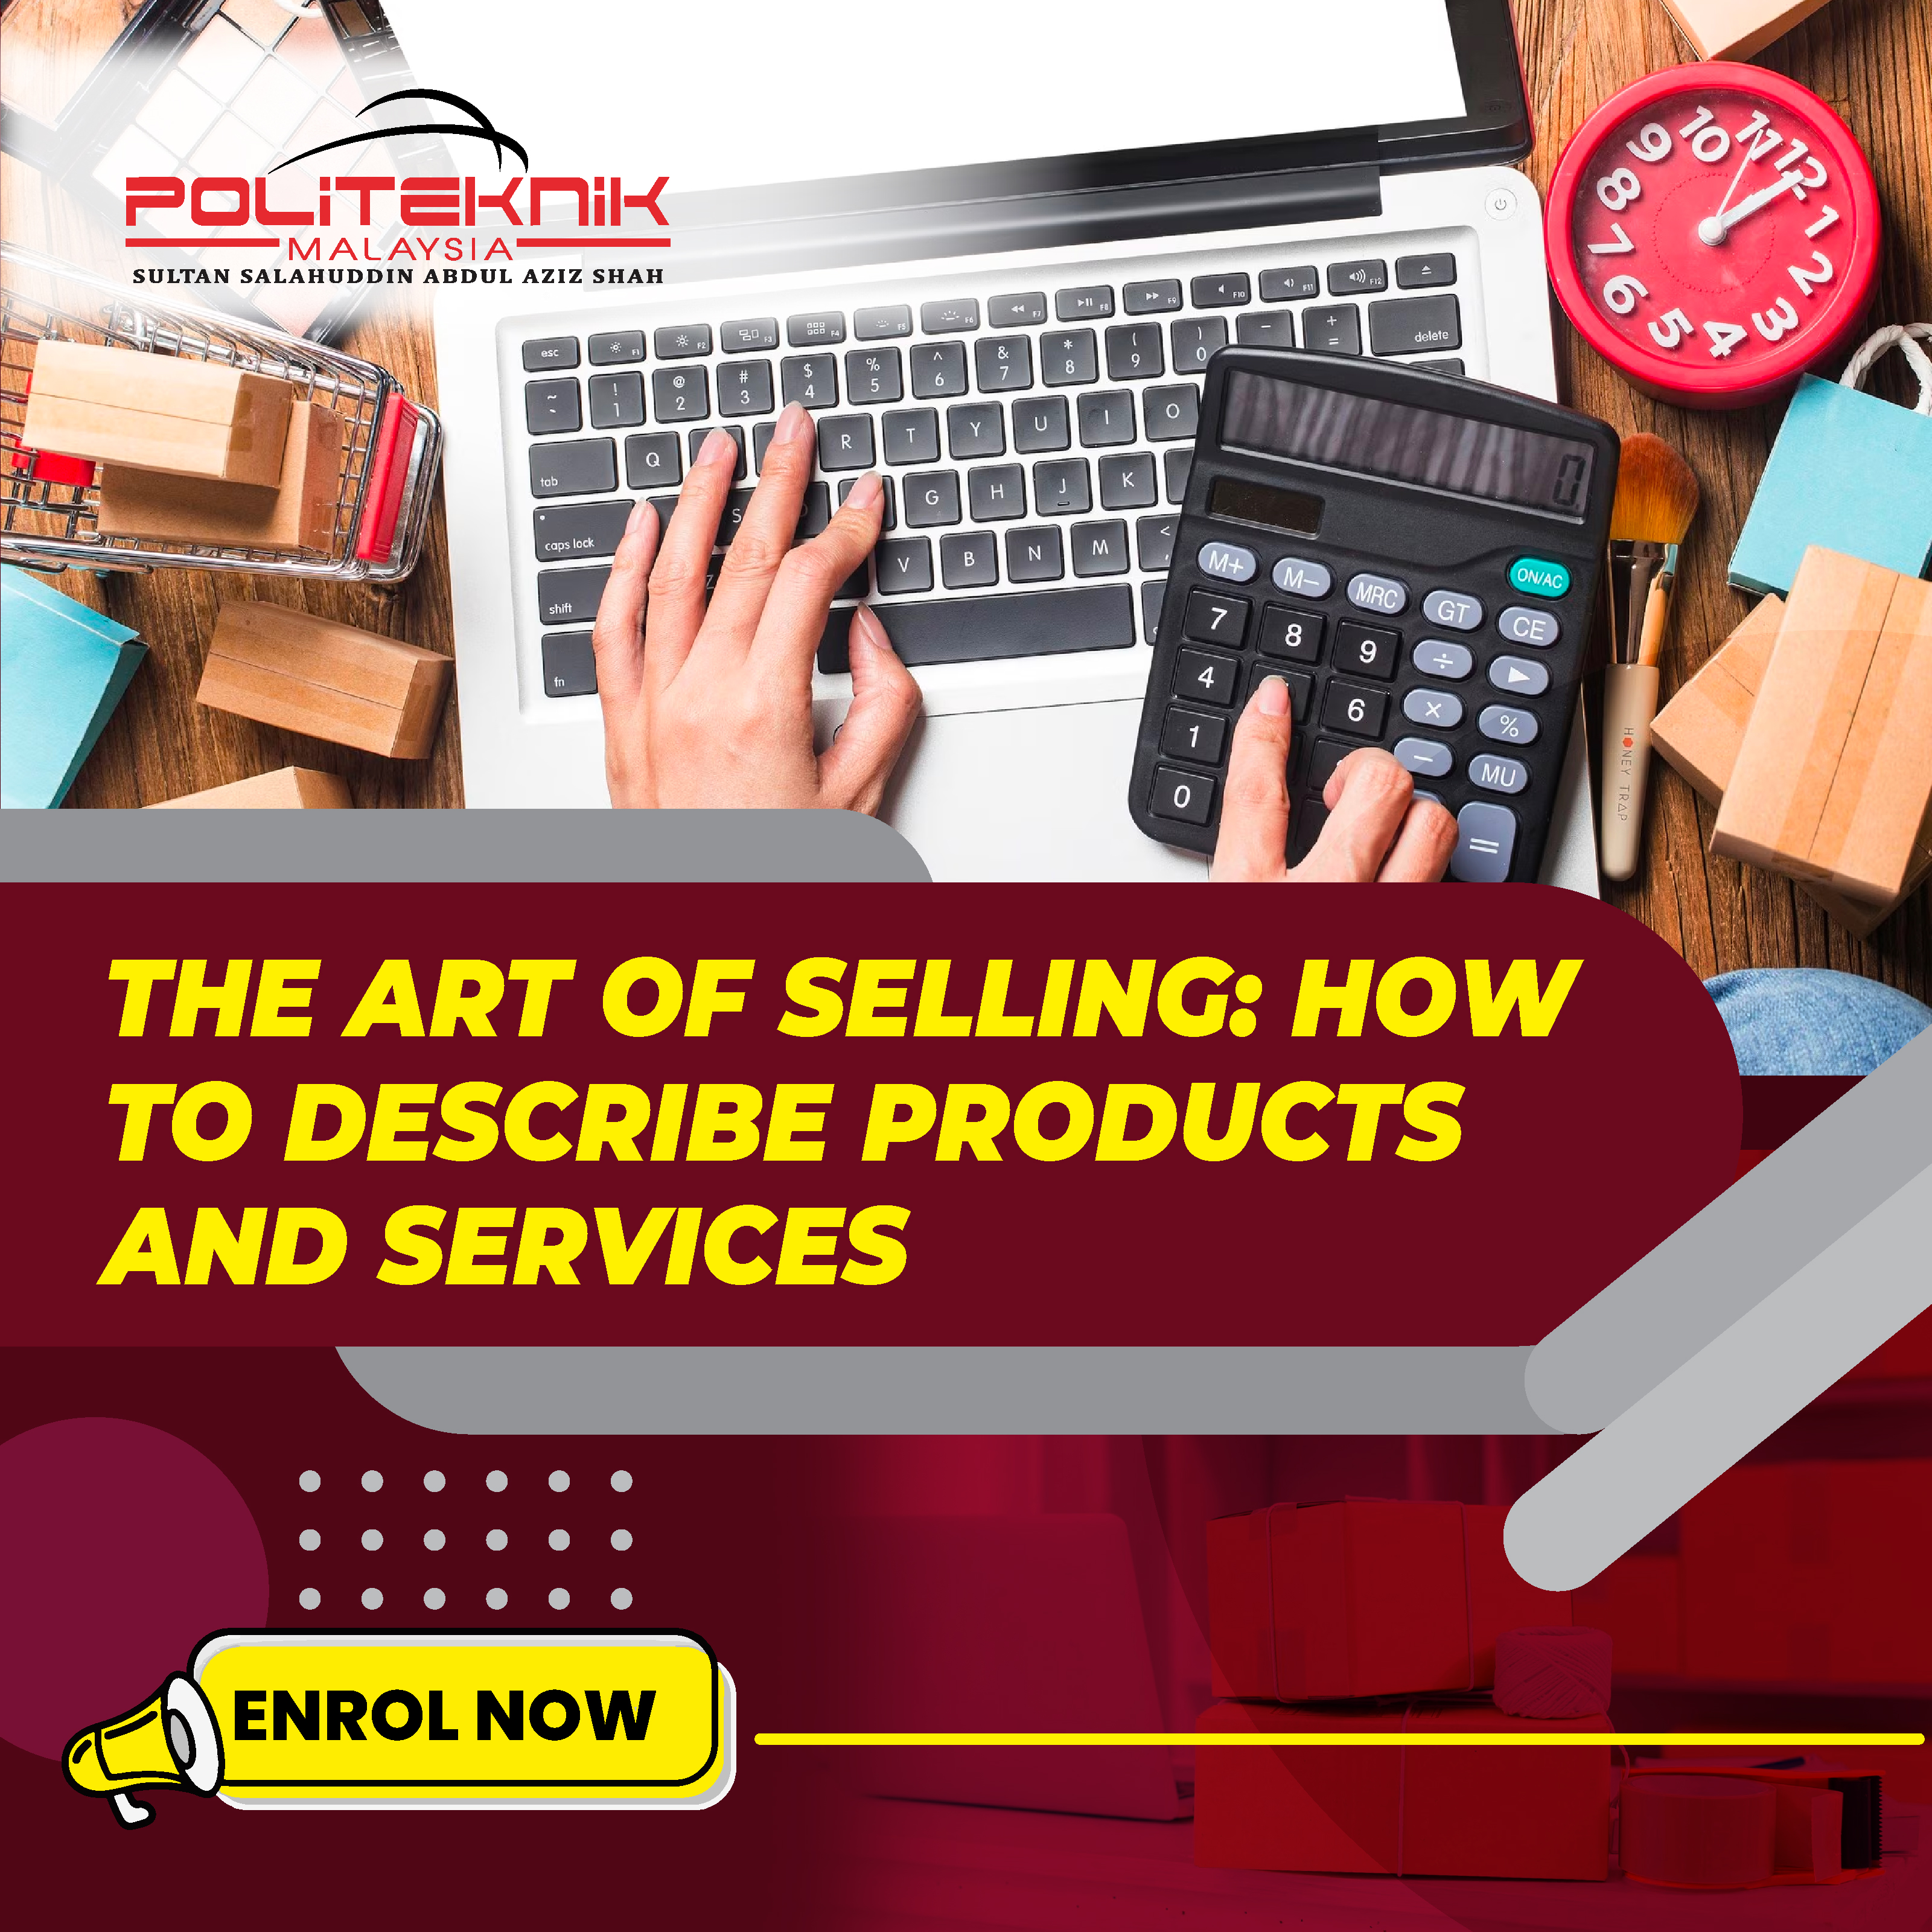 The Art of Selling: How to Describe Products and Services